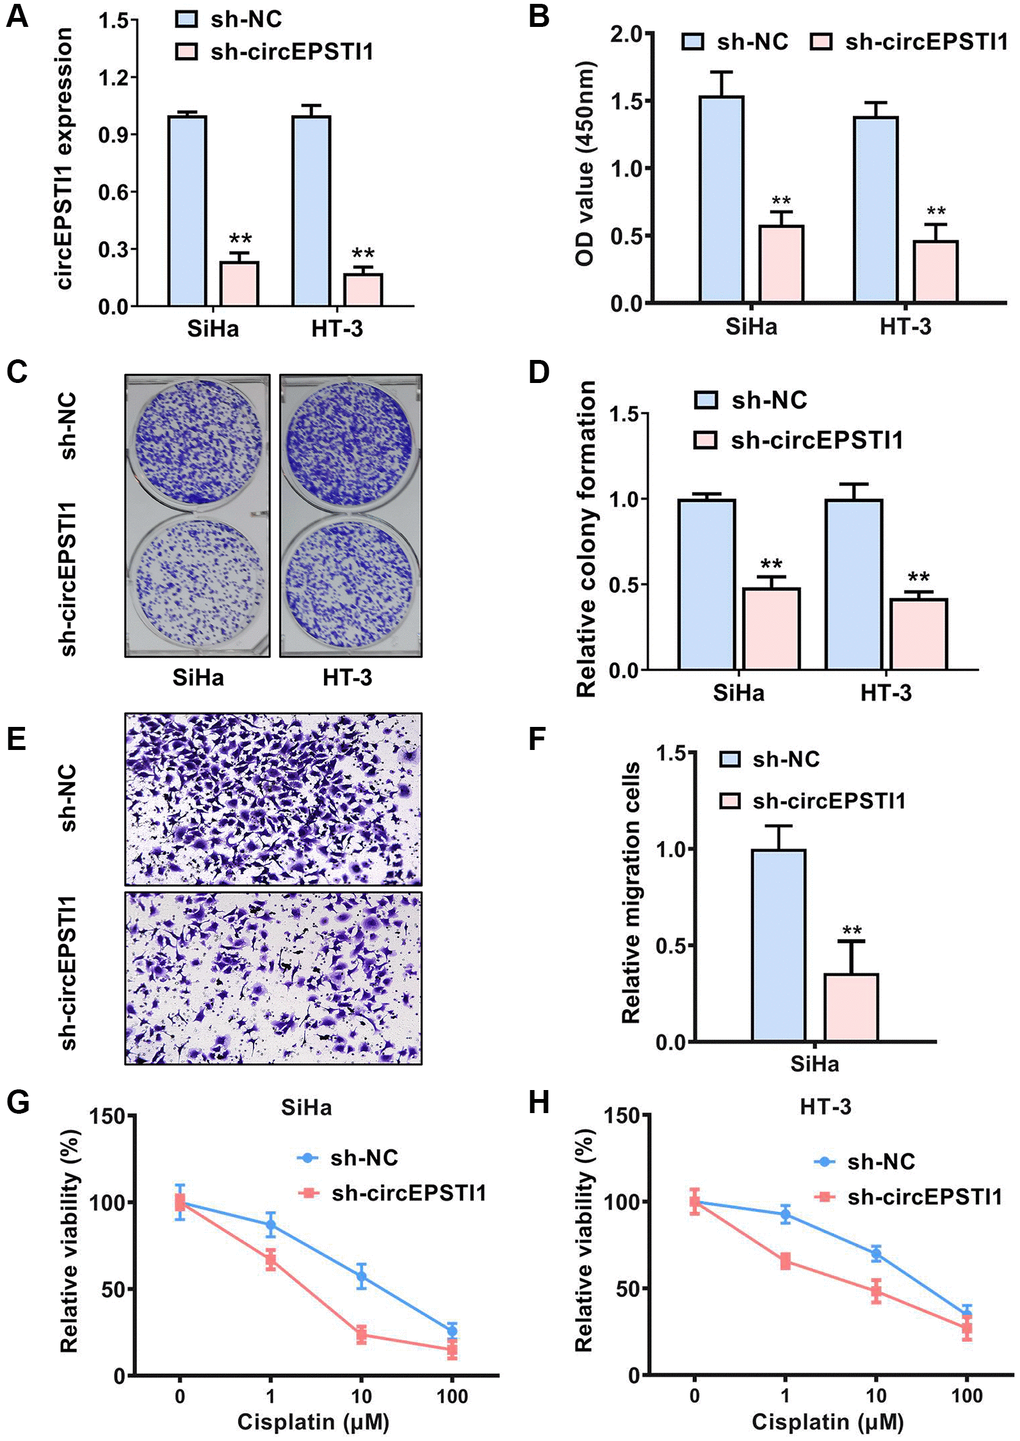 Inhibition of circEPSTI1 attenuates the progress and cisplatin resistance of cervical cancer cells. (A) The effect of shRNA knockdown of circEPSTI1 was assessed in SiHa, as well as HT-3 cell lines of cervical cancer, assessing via qRT-PCR. (B) CCK-8 assay was adopted to test the cell growth rate in SiHa along with HT-3 cell lines of cervical cancer. (C, D) Colony-formation experiments were conducted in SiHa, as well as HT-3 cell lines of cervical cancer. (E, F) Transwell assay for assessment of the metastasis potential of SiHa cervical cancer cell line. (G, H) Inhibition of circEPSTI1 remarkably increased the responsivity of cervical cancer to cisplatin treatment in SiHa along with HT-3 cervical cancer cell lines.